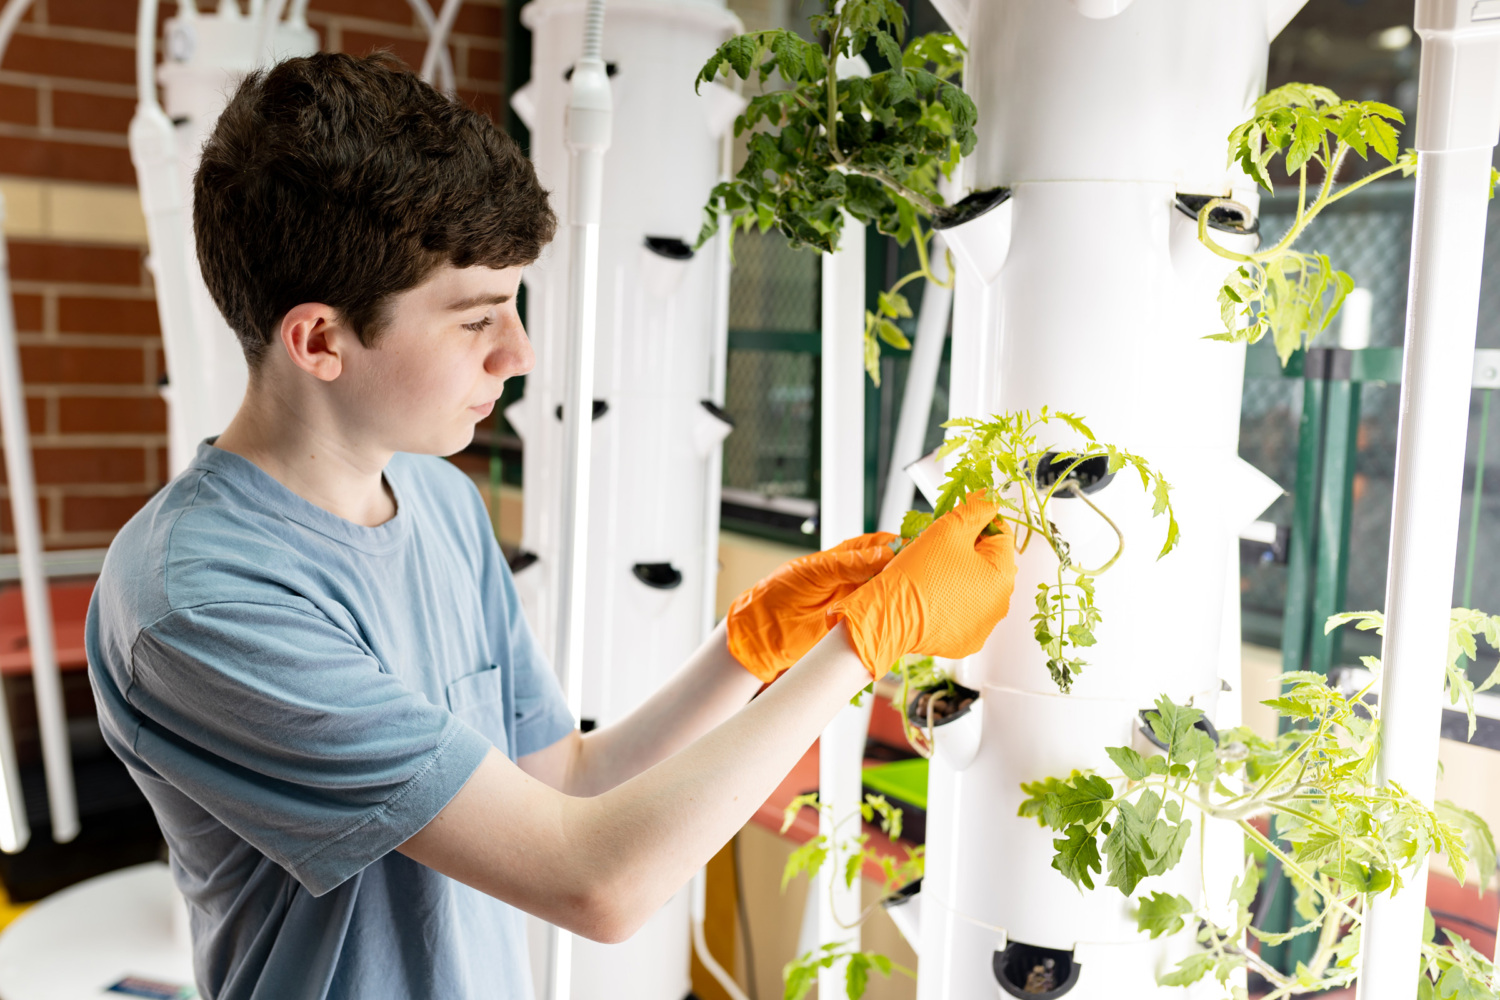 Steven Hoffen examines a hydroponic plant.